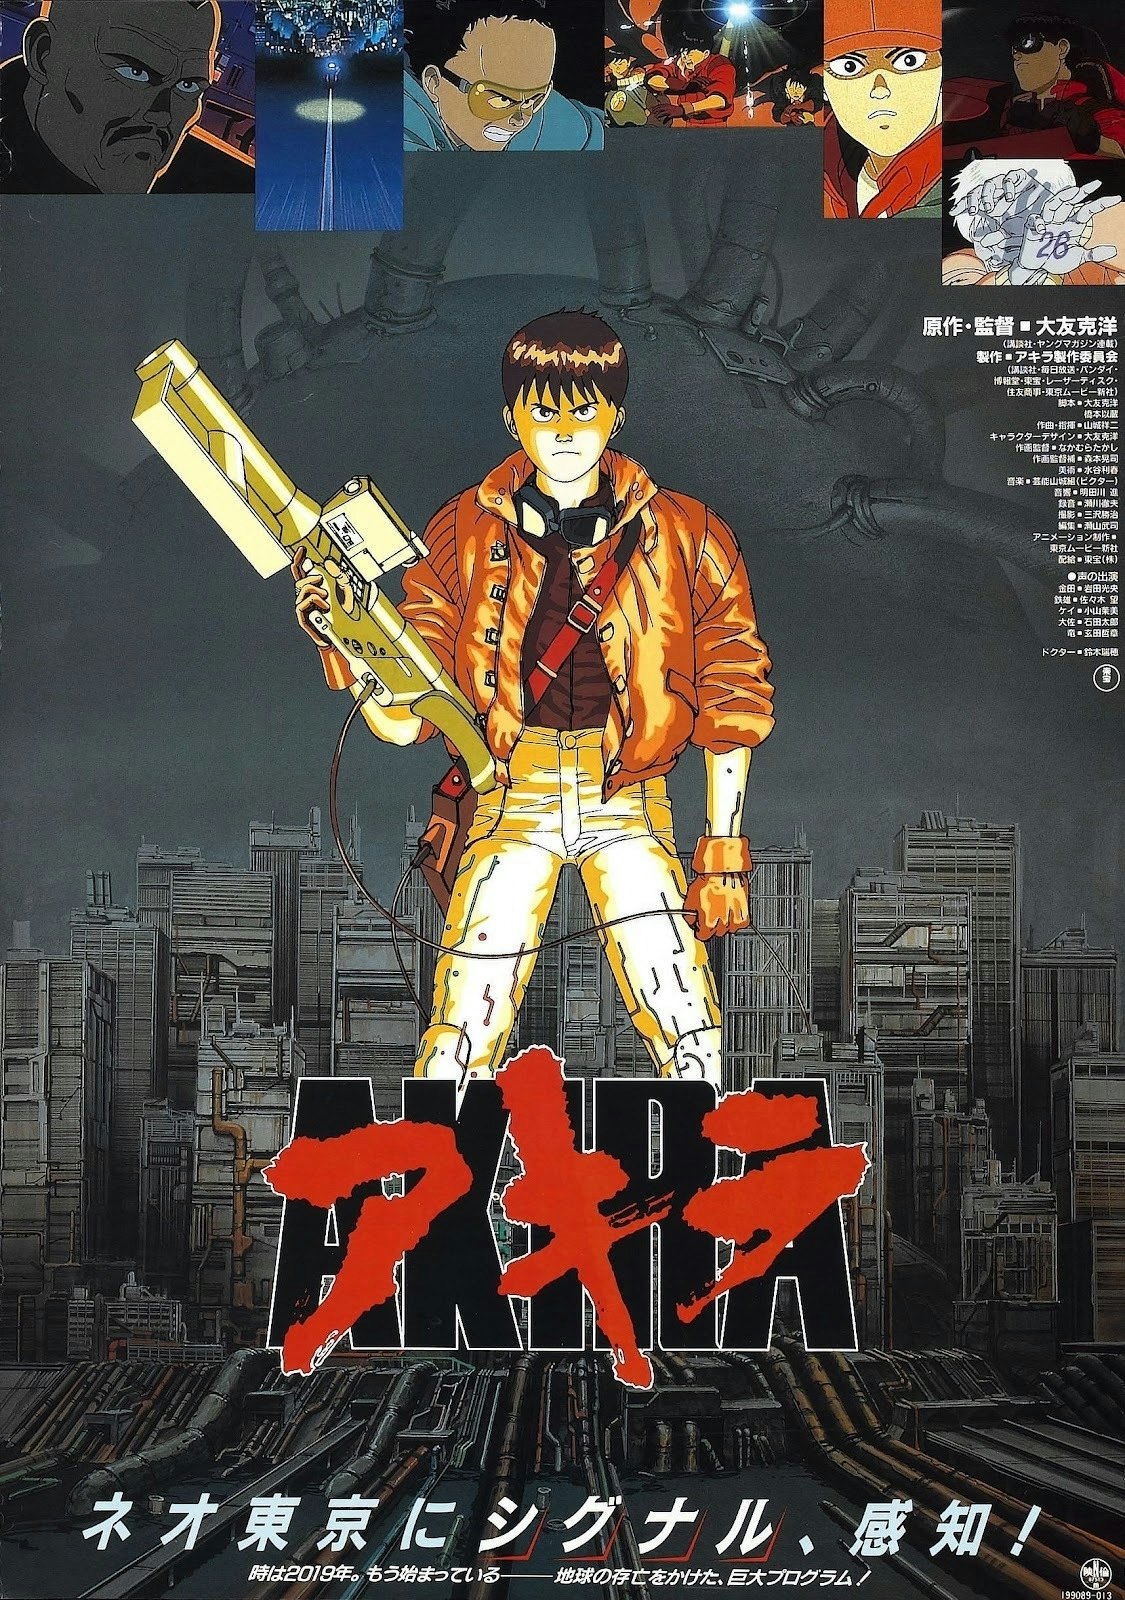 Iconic anime Akira to screen at IMAX for the first time ever   pennlivecom